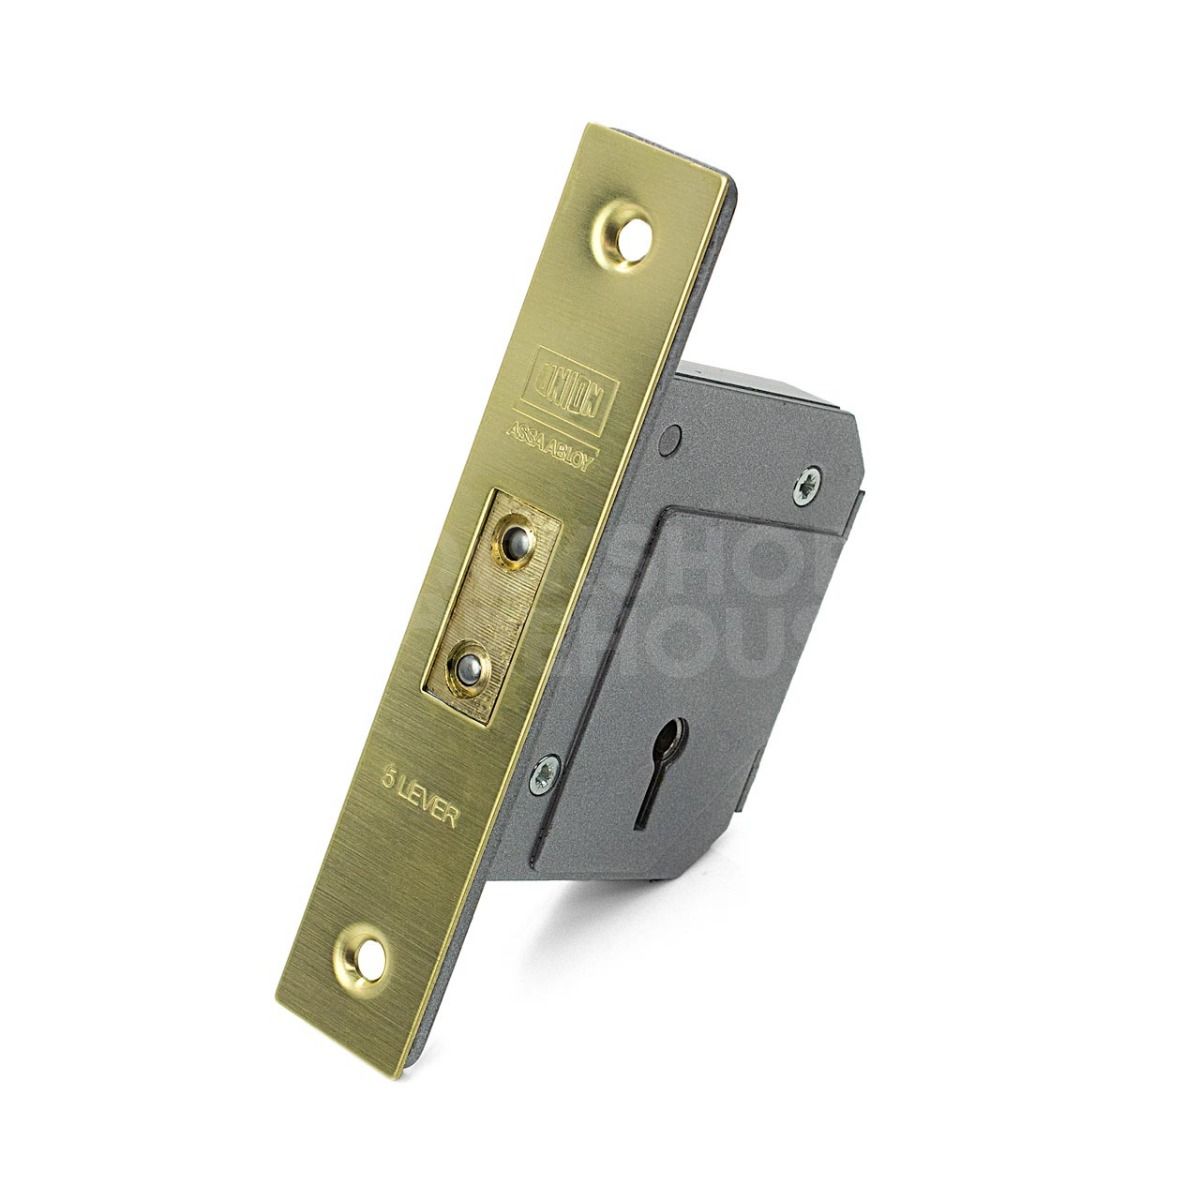 Union 3G114 Mortice Deadlock (Old Style)